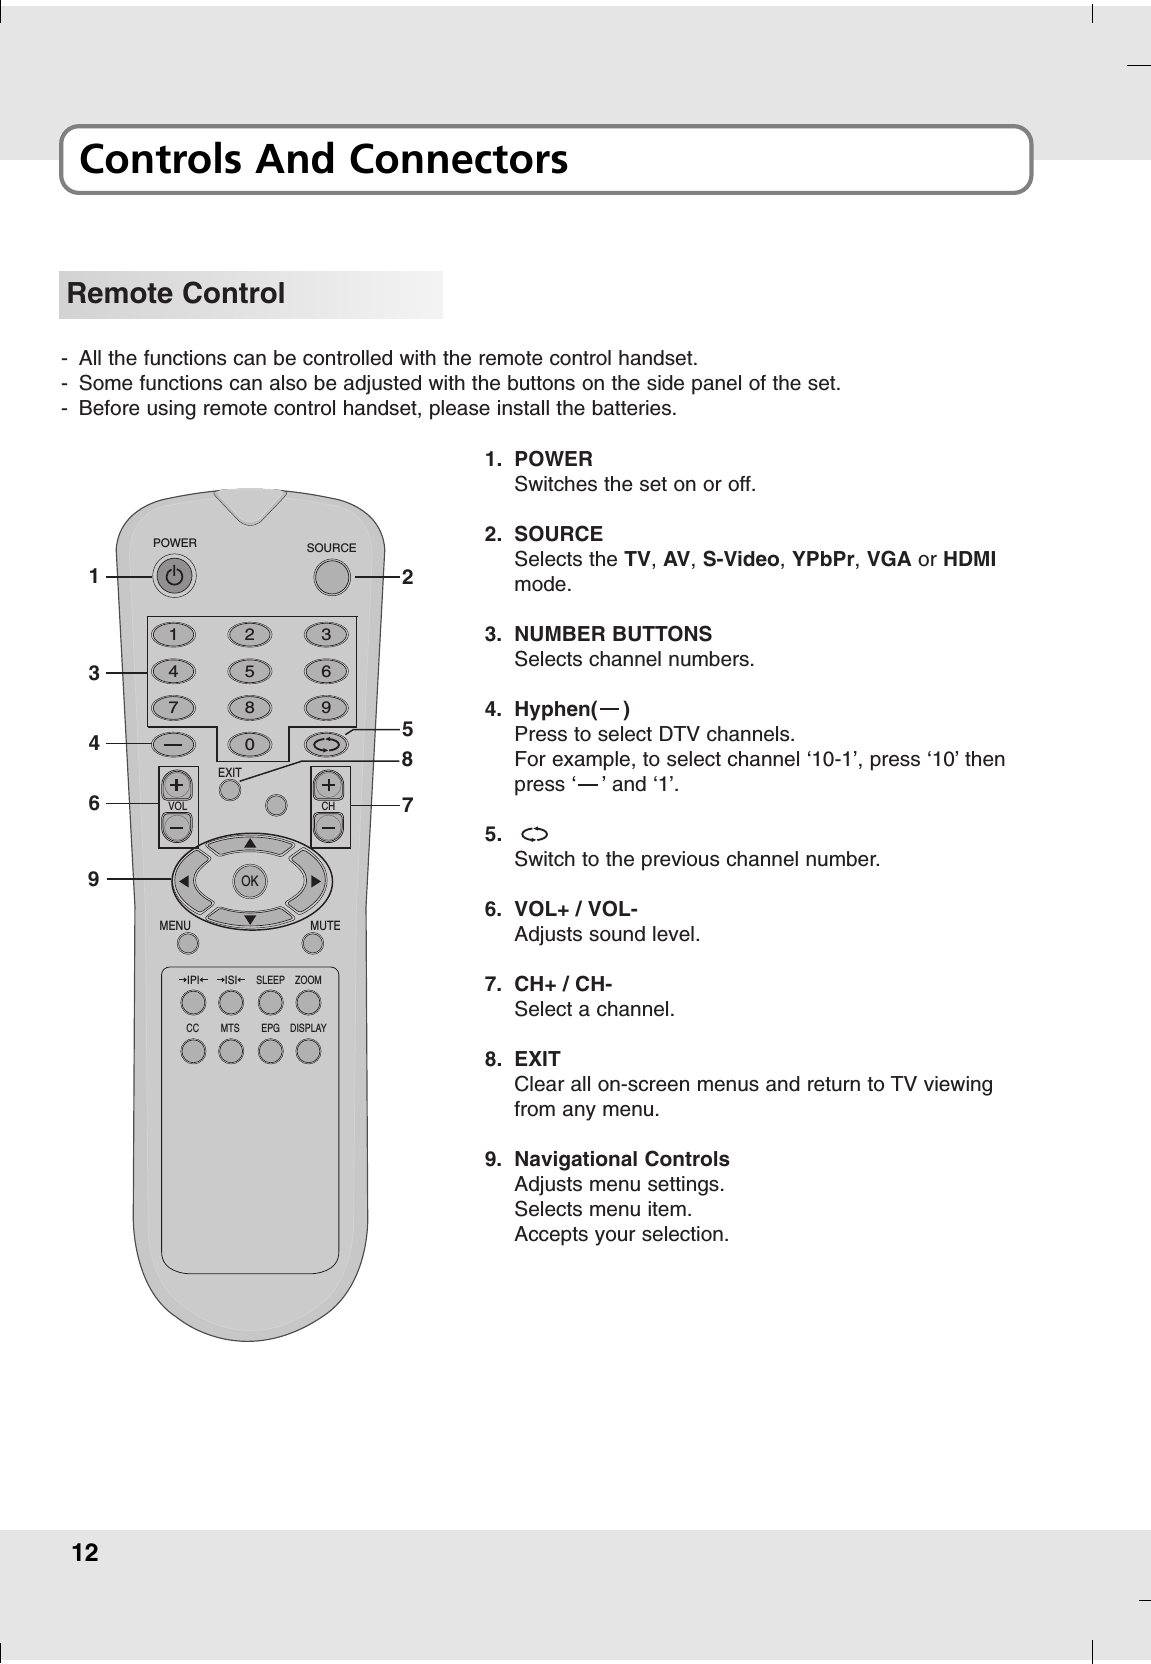 12Controls And ConnectorsRemote Control1 2 34 5 67 8 90EXITVOL CHMENU MUTEOKSOURCEPOWERSLEEP ZOOMIPI ISIEPGMTSCC DISPLAY1. POWERSwitches the set on or off.2. SOURCESelects the TV, AV,S-Video, YPbPr,VGA or HDMImode.3. NUMBER BUTTONSSelects channel numbers.4. Hyphen(    )Press to select DTV channels. For example, to select channel ‘10-1’, press ‘10’ thenpress ‘    ’ and ‘1’.5.Switch to the previous channel number.6. VOL+ / VOL-Adjusts sound level.7. CH+ / CH-Select a channel.8. EXITClear all on-screen menus and return to TV viewingfrom any menu.9. Navigational ControlsAdjusts menu settings.Selects menu item.Accepts your selection.-All the functions can be controlled with the remote control handset.-Some functions can also be adjusted with the buttons on the side panel of the set.-Before using remote control handset, please install the batteries.134625789